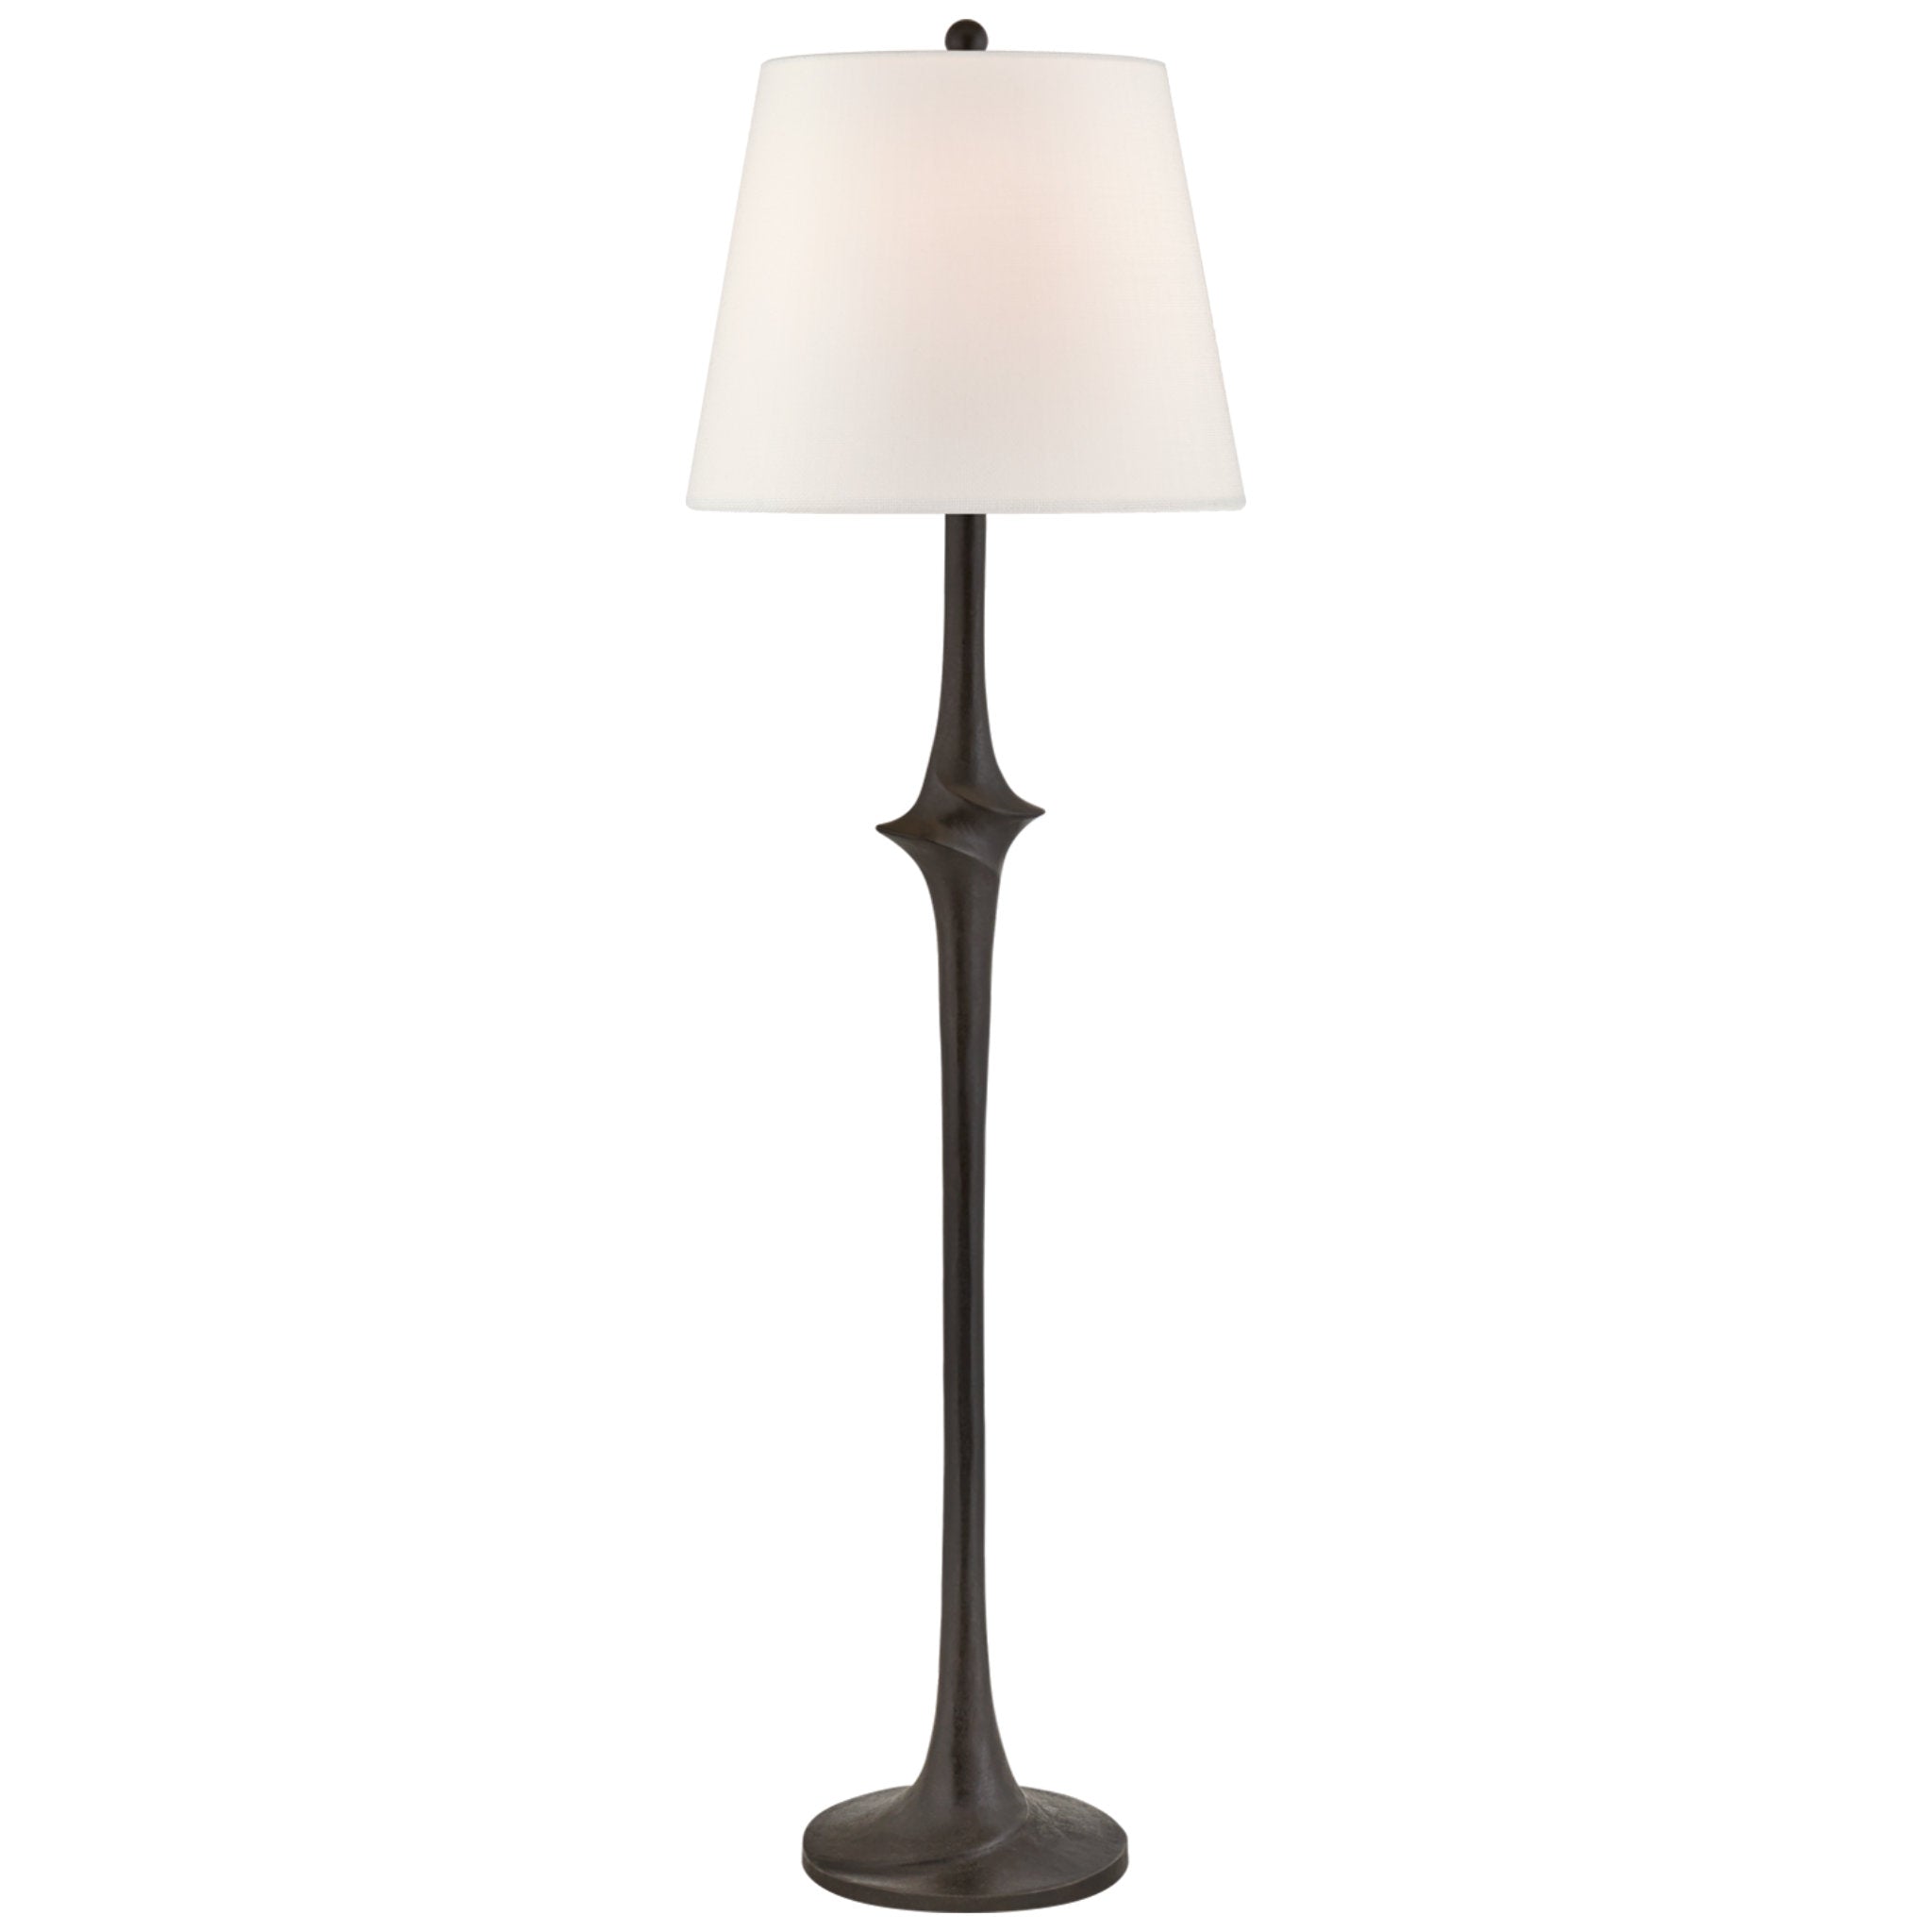 Chapman & Myers Bates Large Sculpted Floor Lamp in Aged Iron with Linen Shade